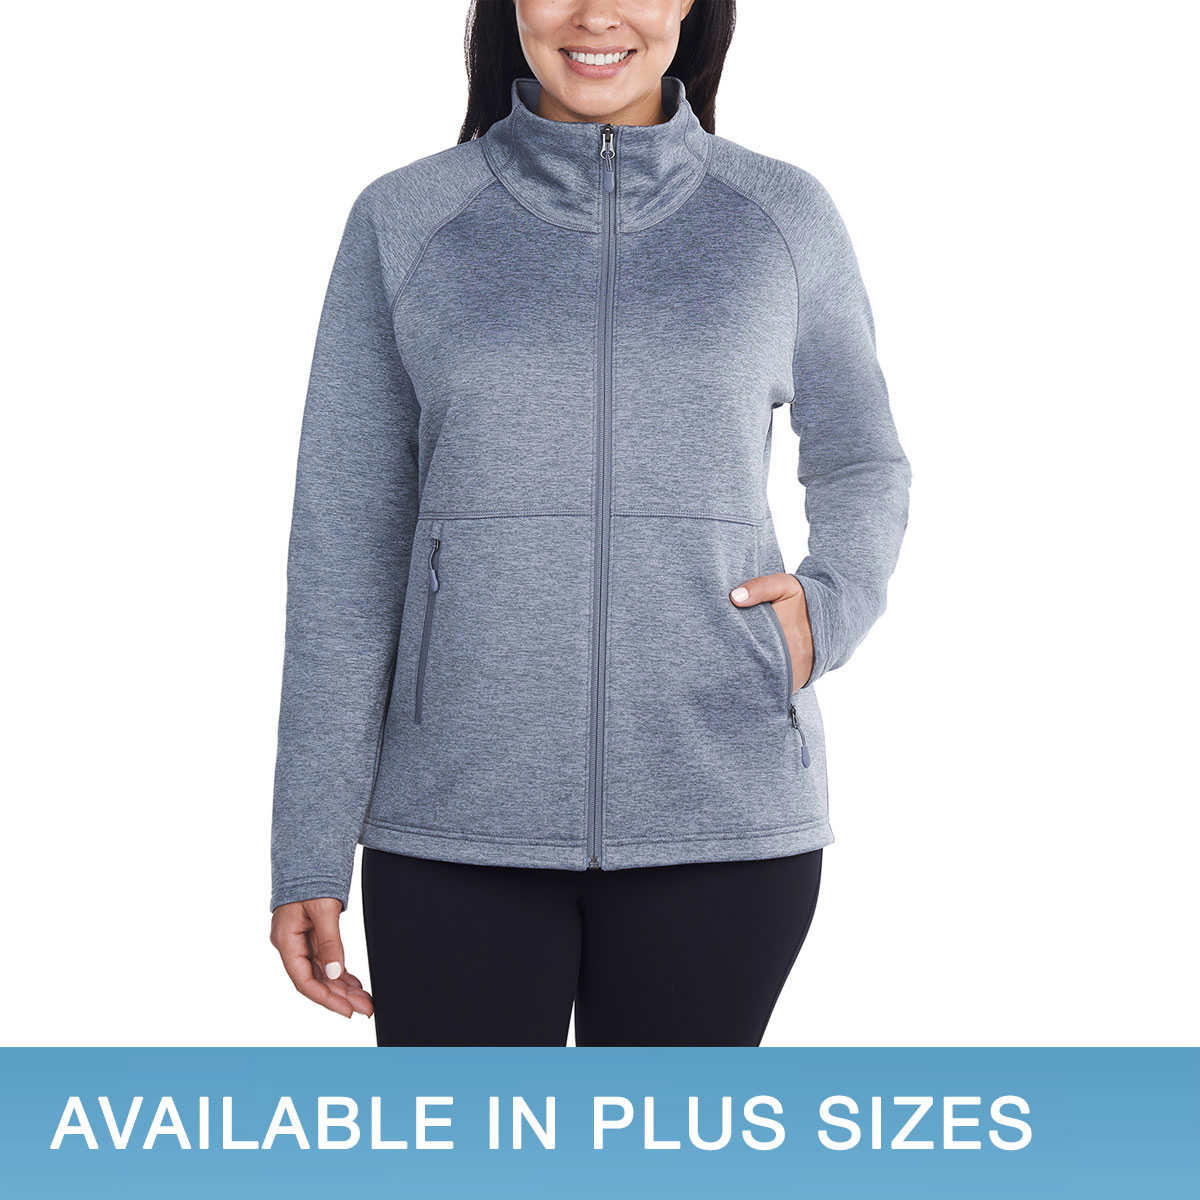 Full Zip Hoodies - Shop for Activewear Jackets Products Online